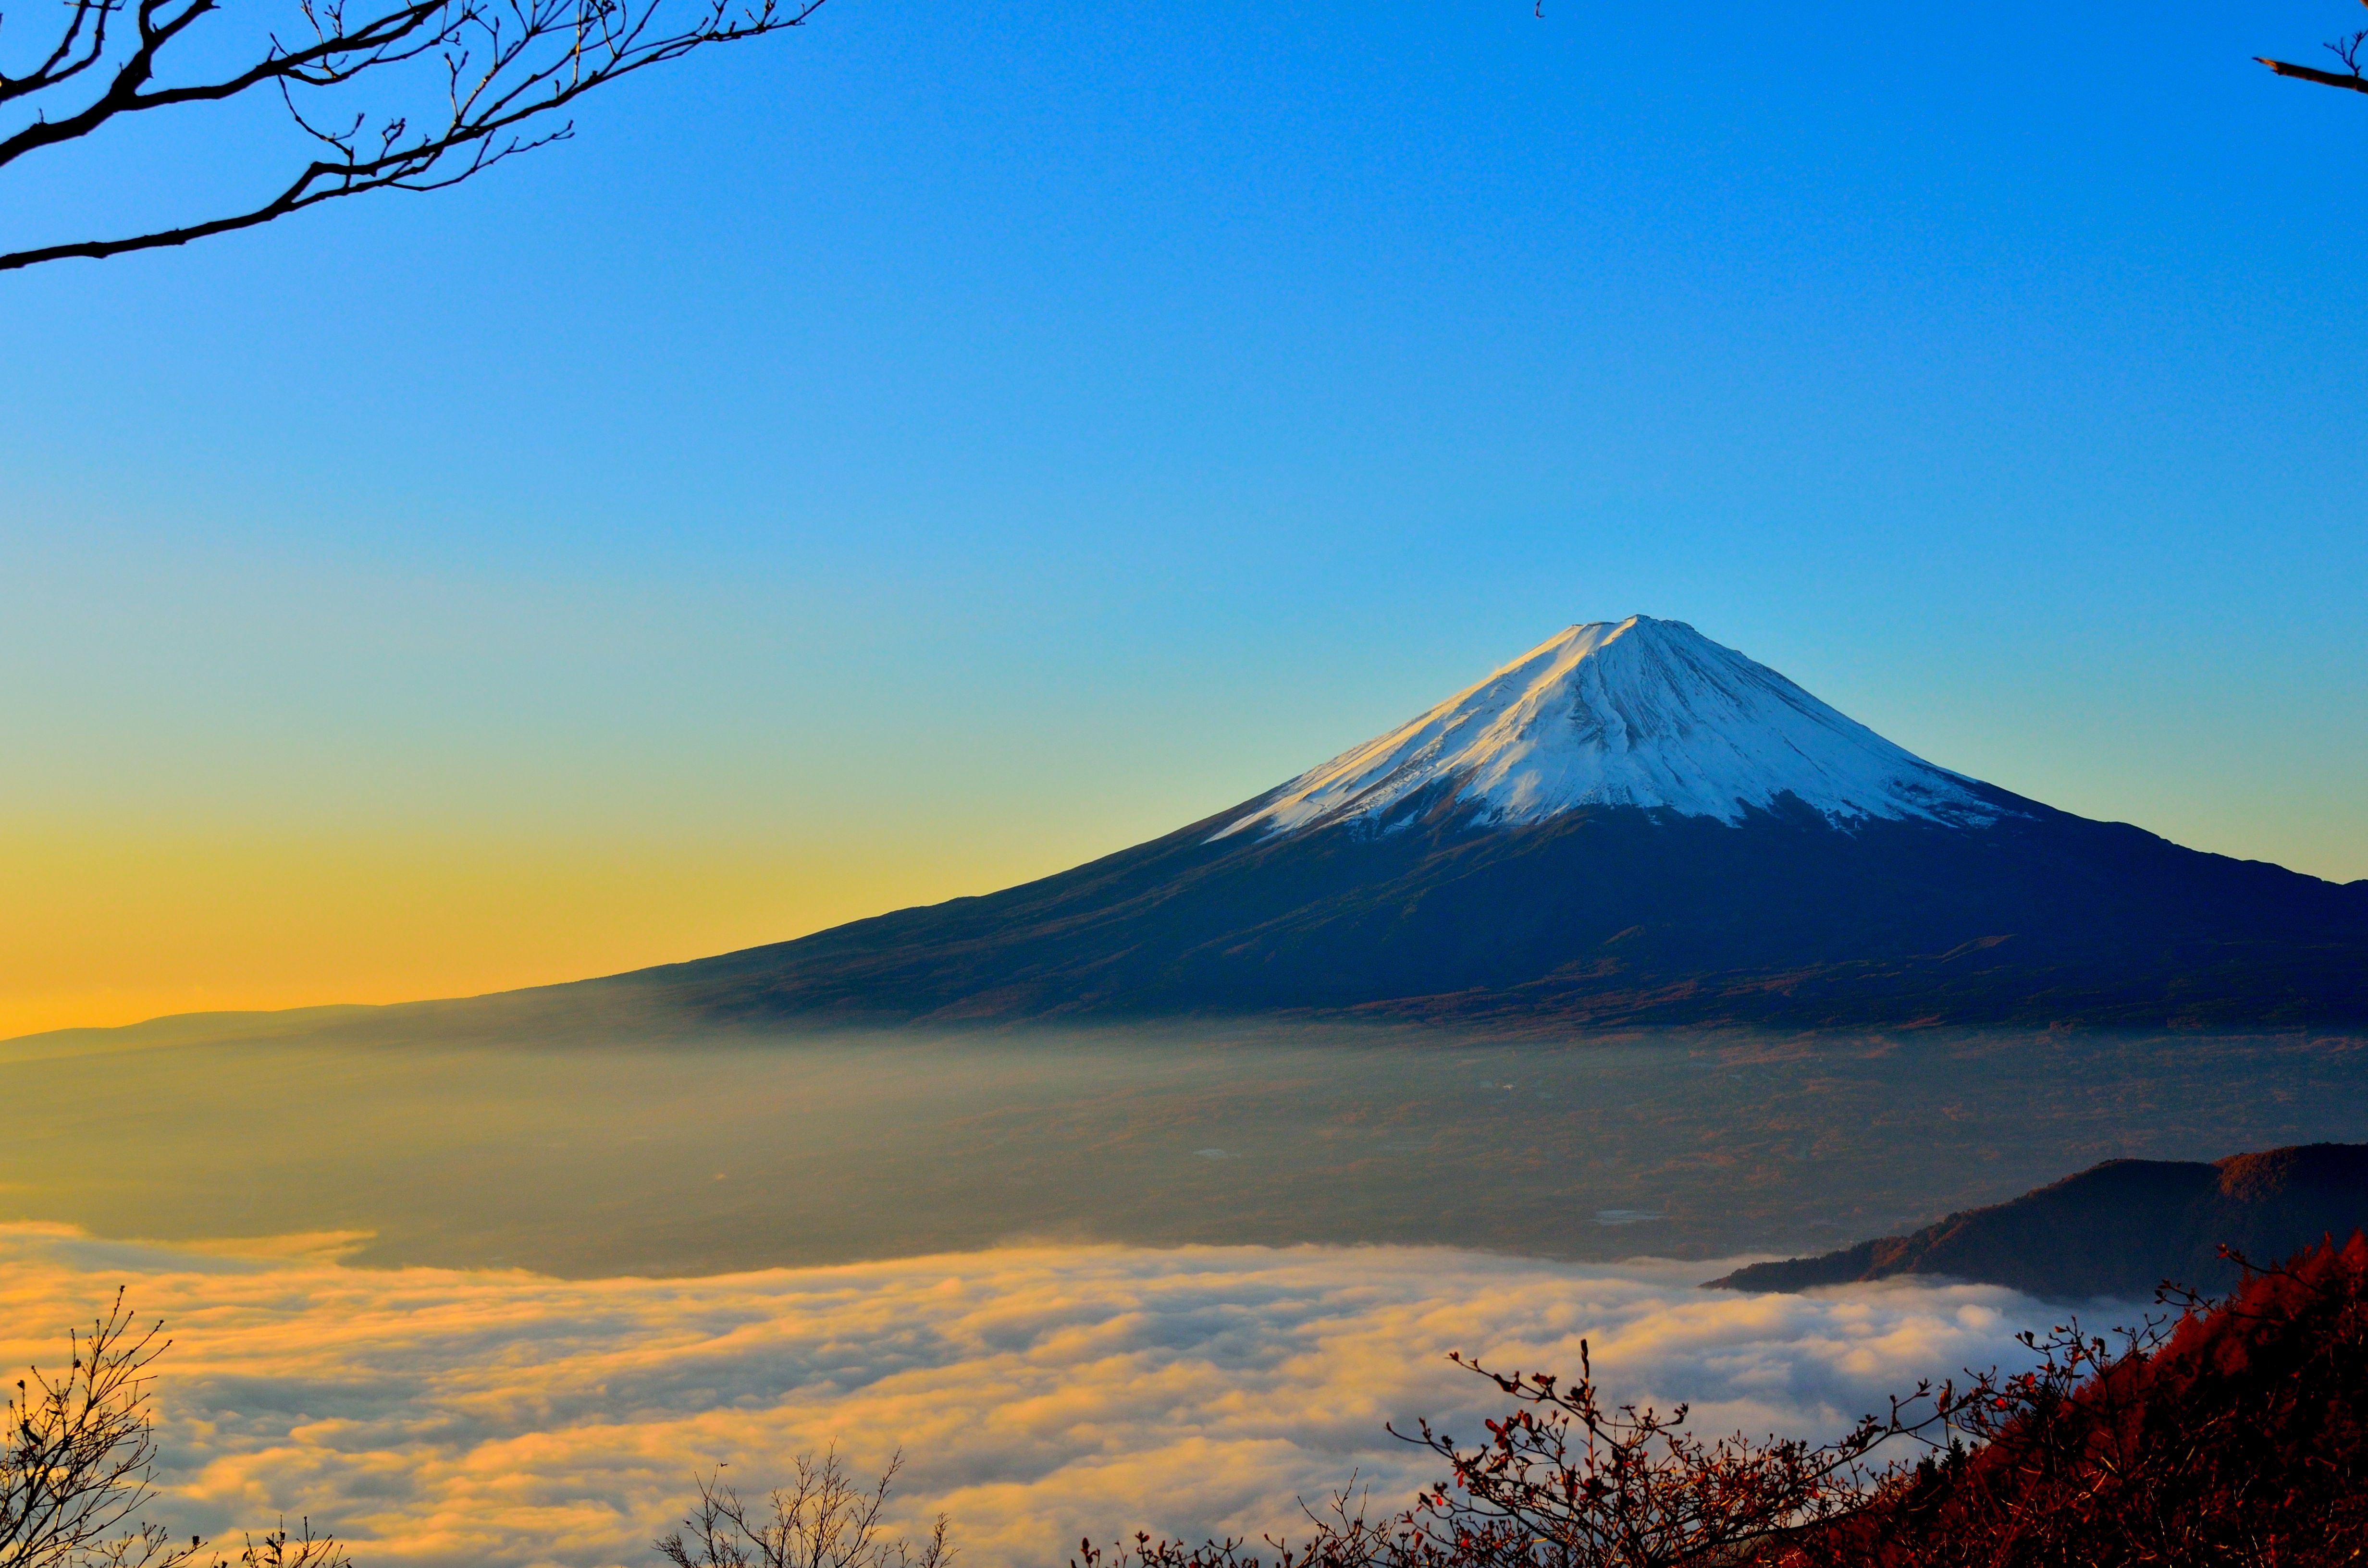  Landscape  with clouds and Mount Fuji Japan  image Free 